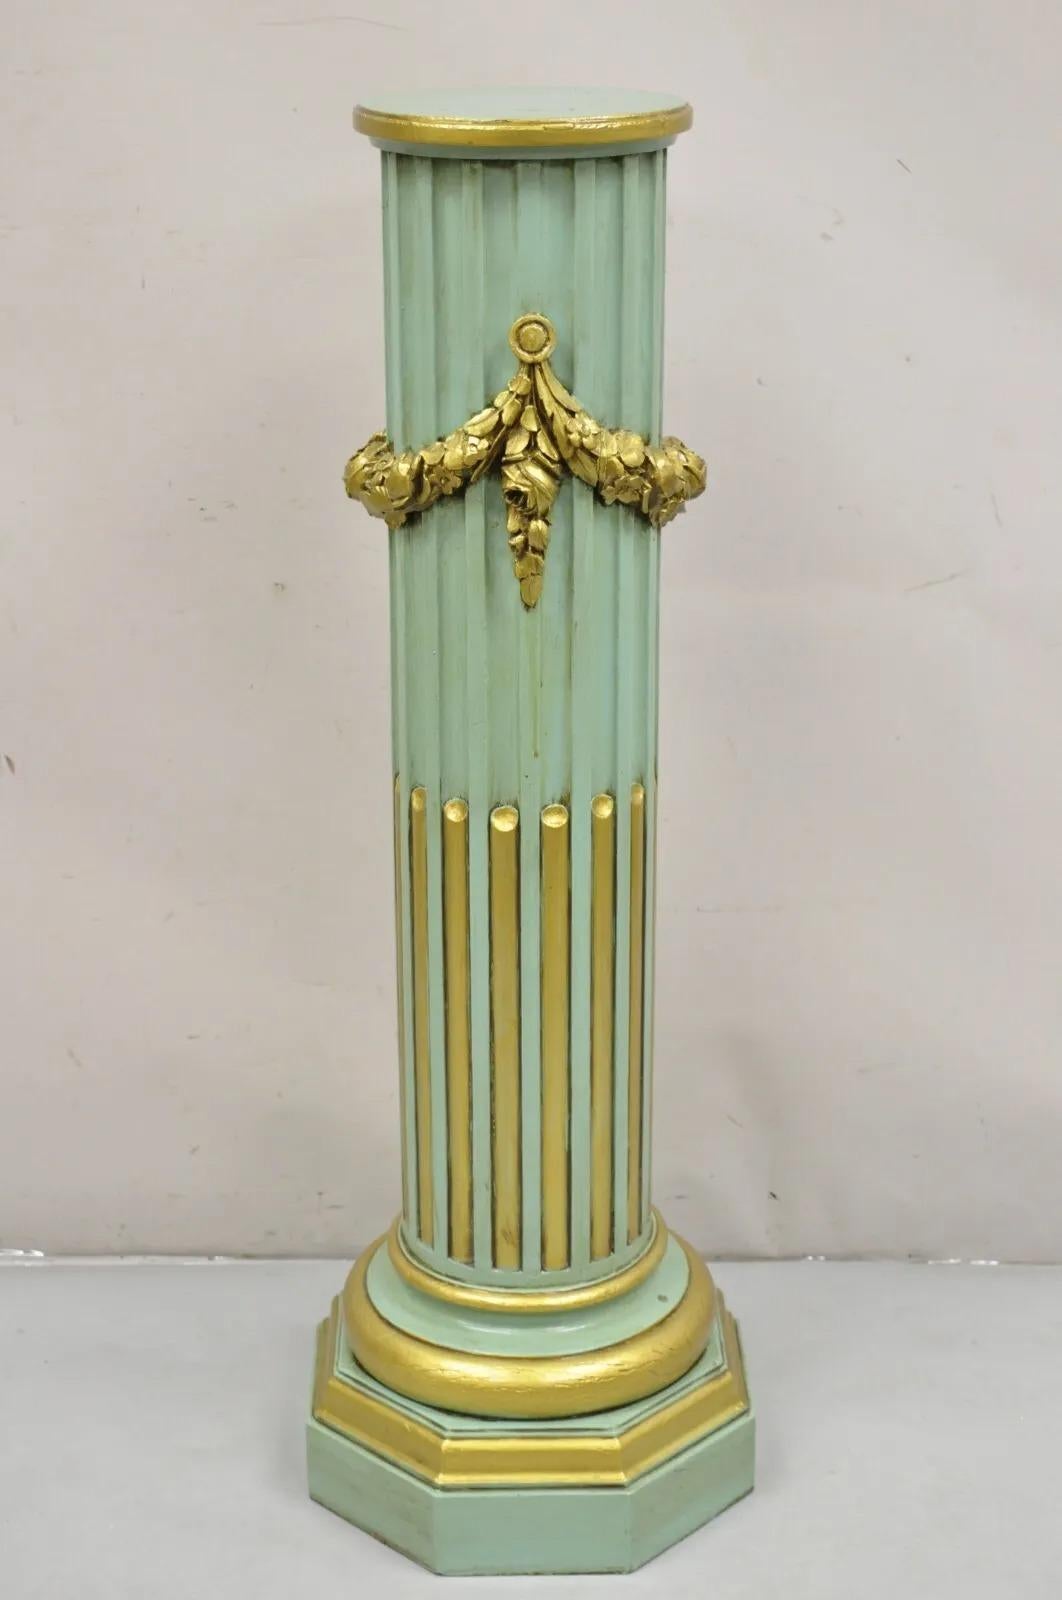 Italian Neoclassical French Empire Green & Gold Painted Wooden Column Pedestal For Sale 6